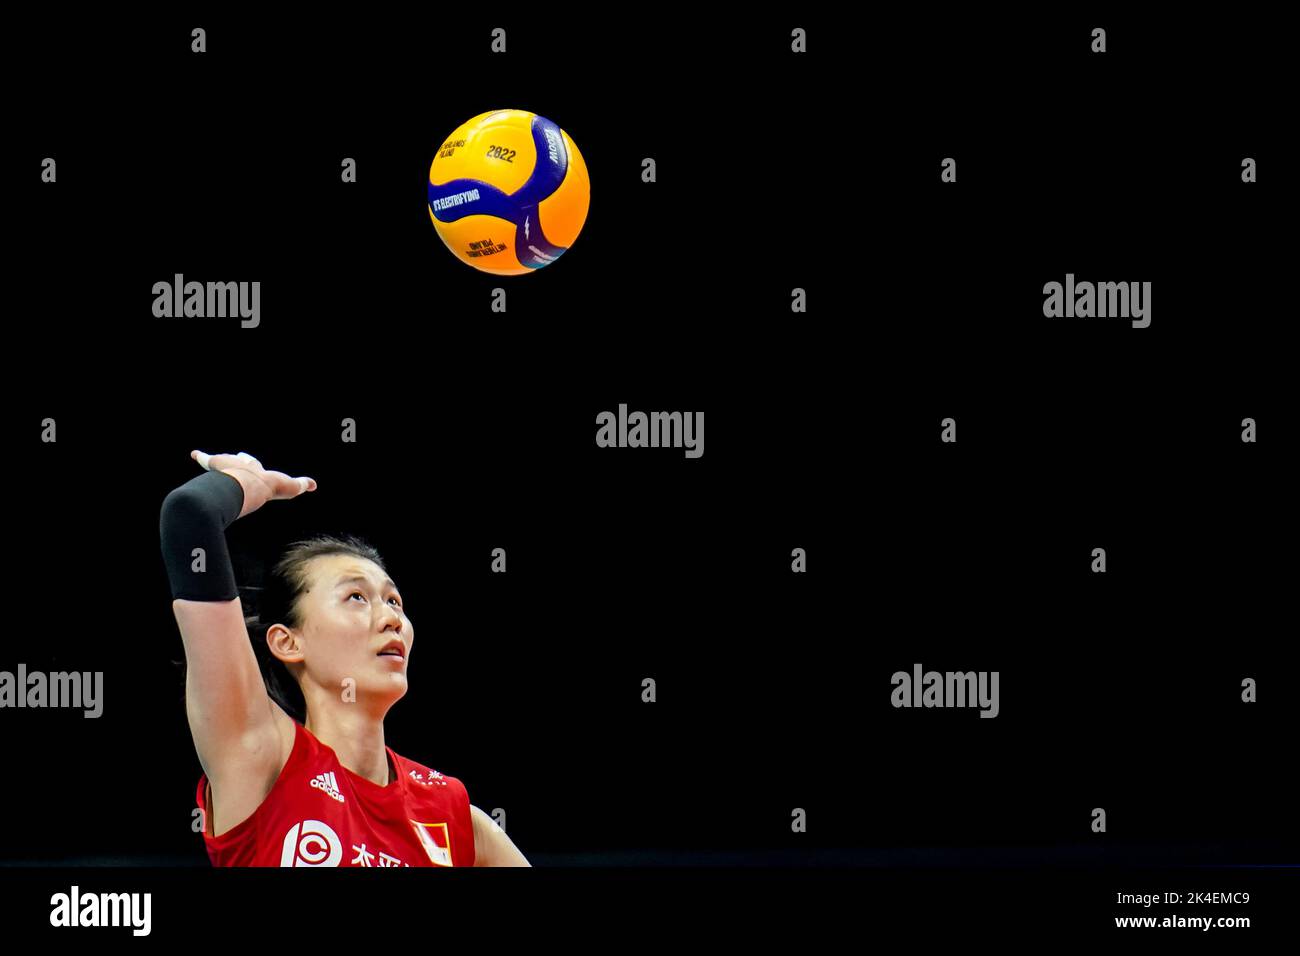 ARNHEM, NETHERLANDS - SEPTEMBER 25: Yizhu Wang of China serves during the Pool D Phase 1 match between China and Argentina on Day 3 of the FIVB Volleyball Womens World Championship 2022 at the Gelredome on September 25, 2022 in Arnhem, Netherlands (Photo by Rene Nijhuis/Orange Pictures) Stock Photo